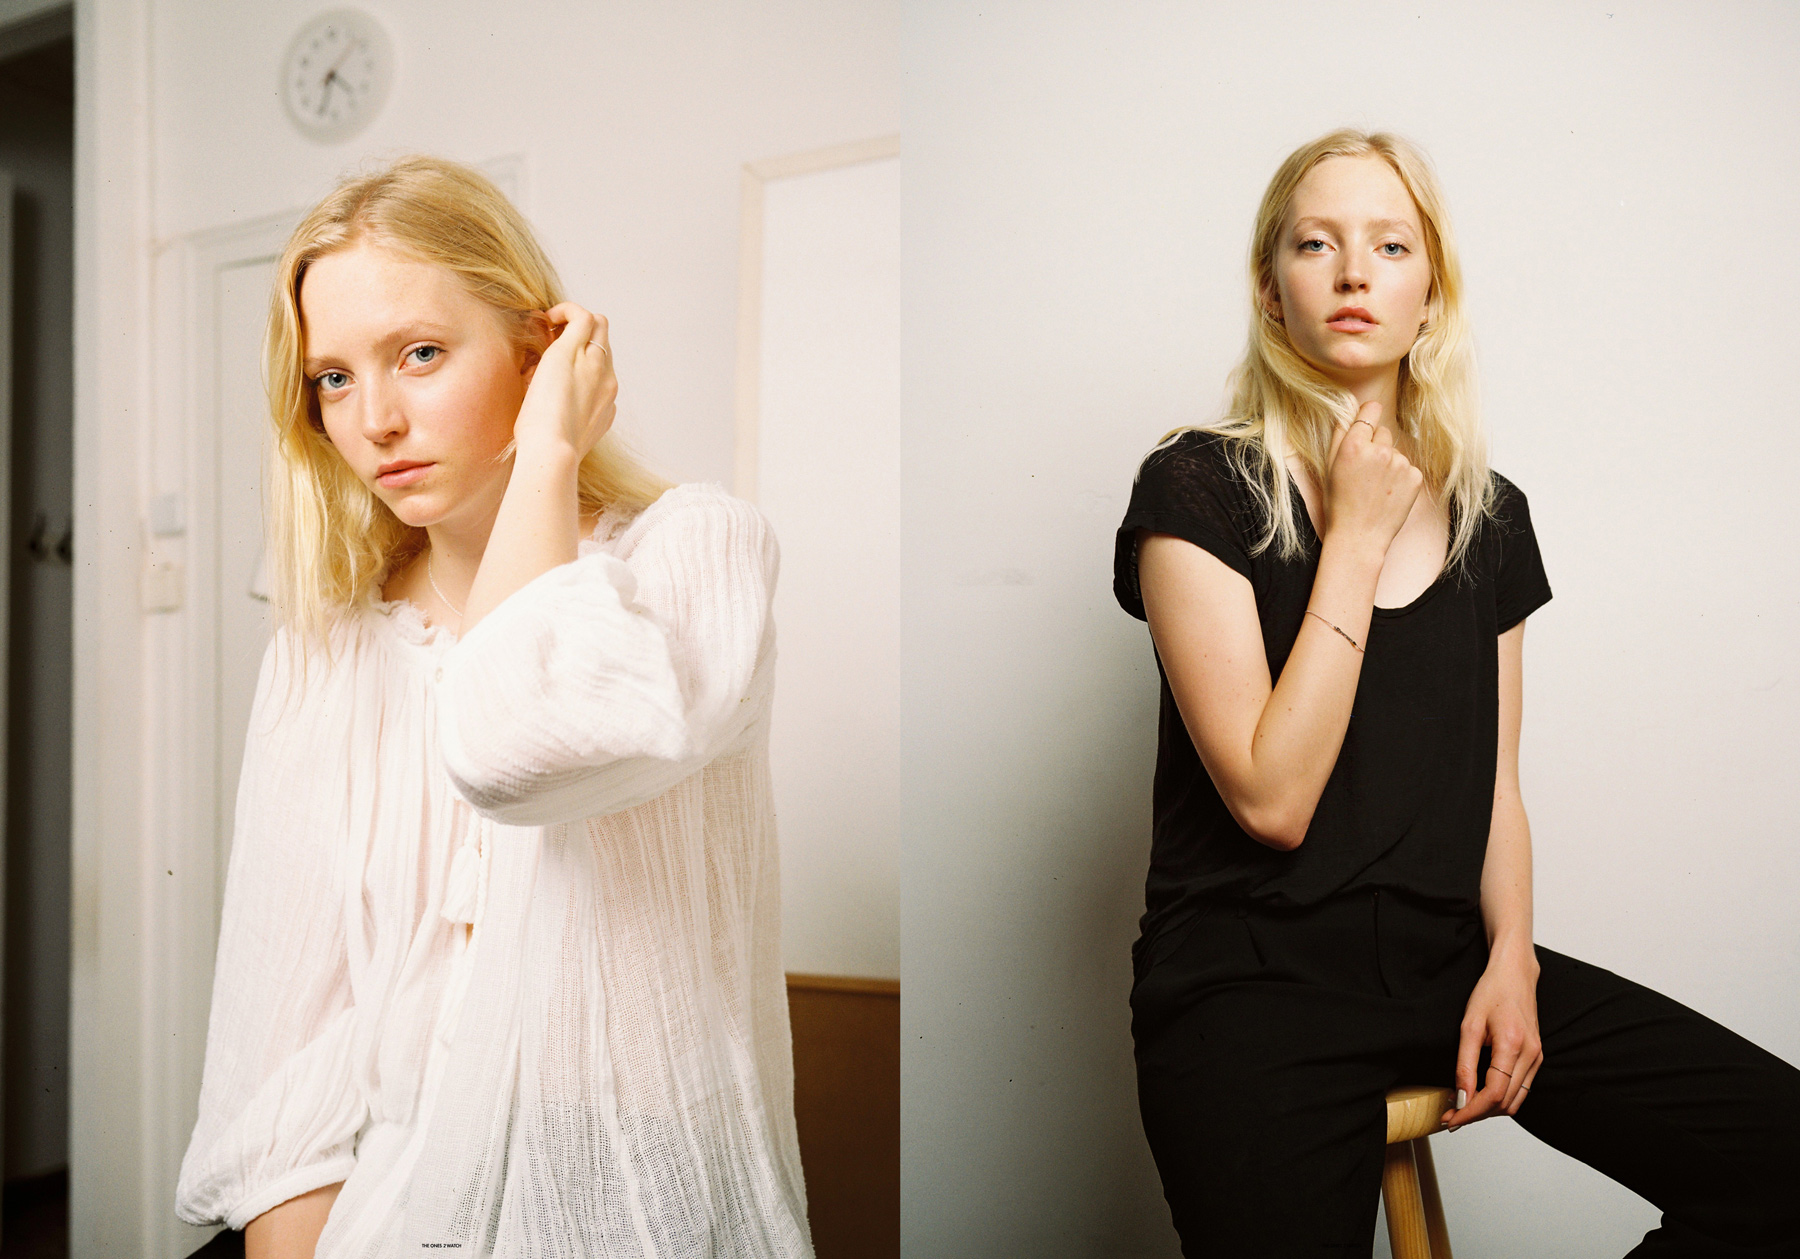 Go See: Fredrika Larsson – the ones 2 watch.